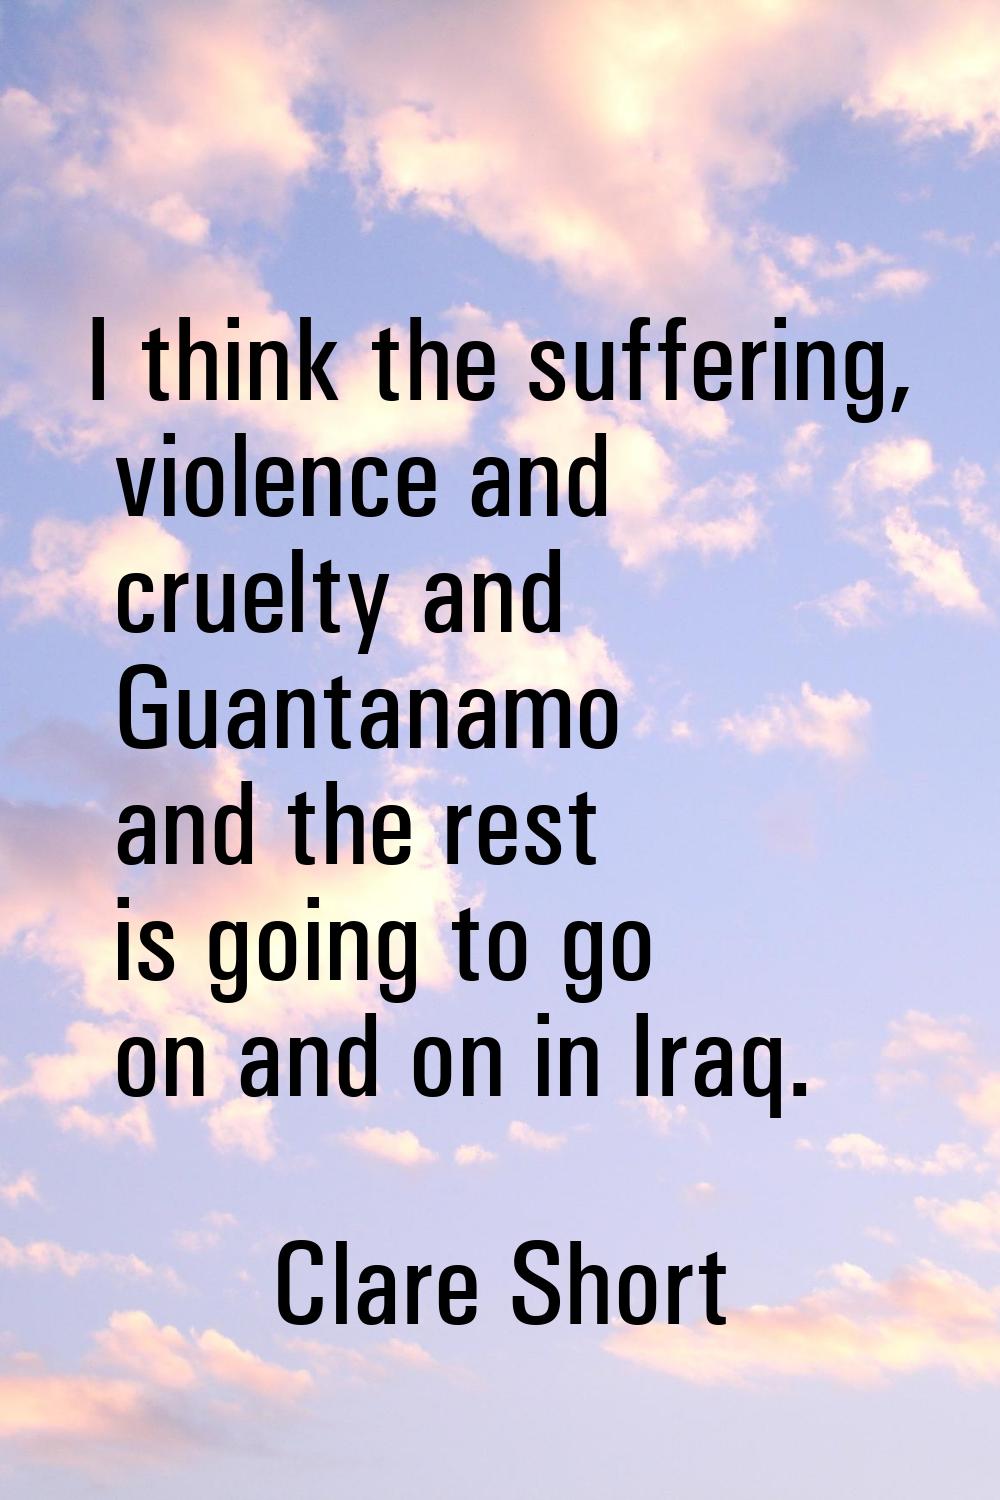 I think the suffering, violence and cruelty and Guantanamo and the rest is going to go on and on in